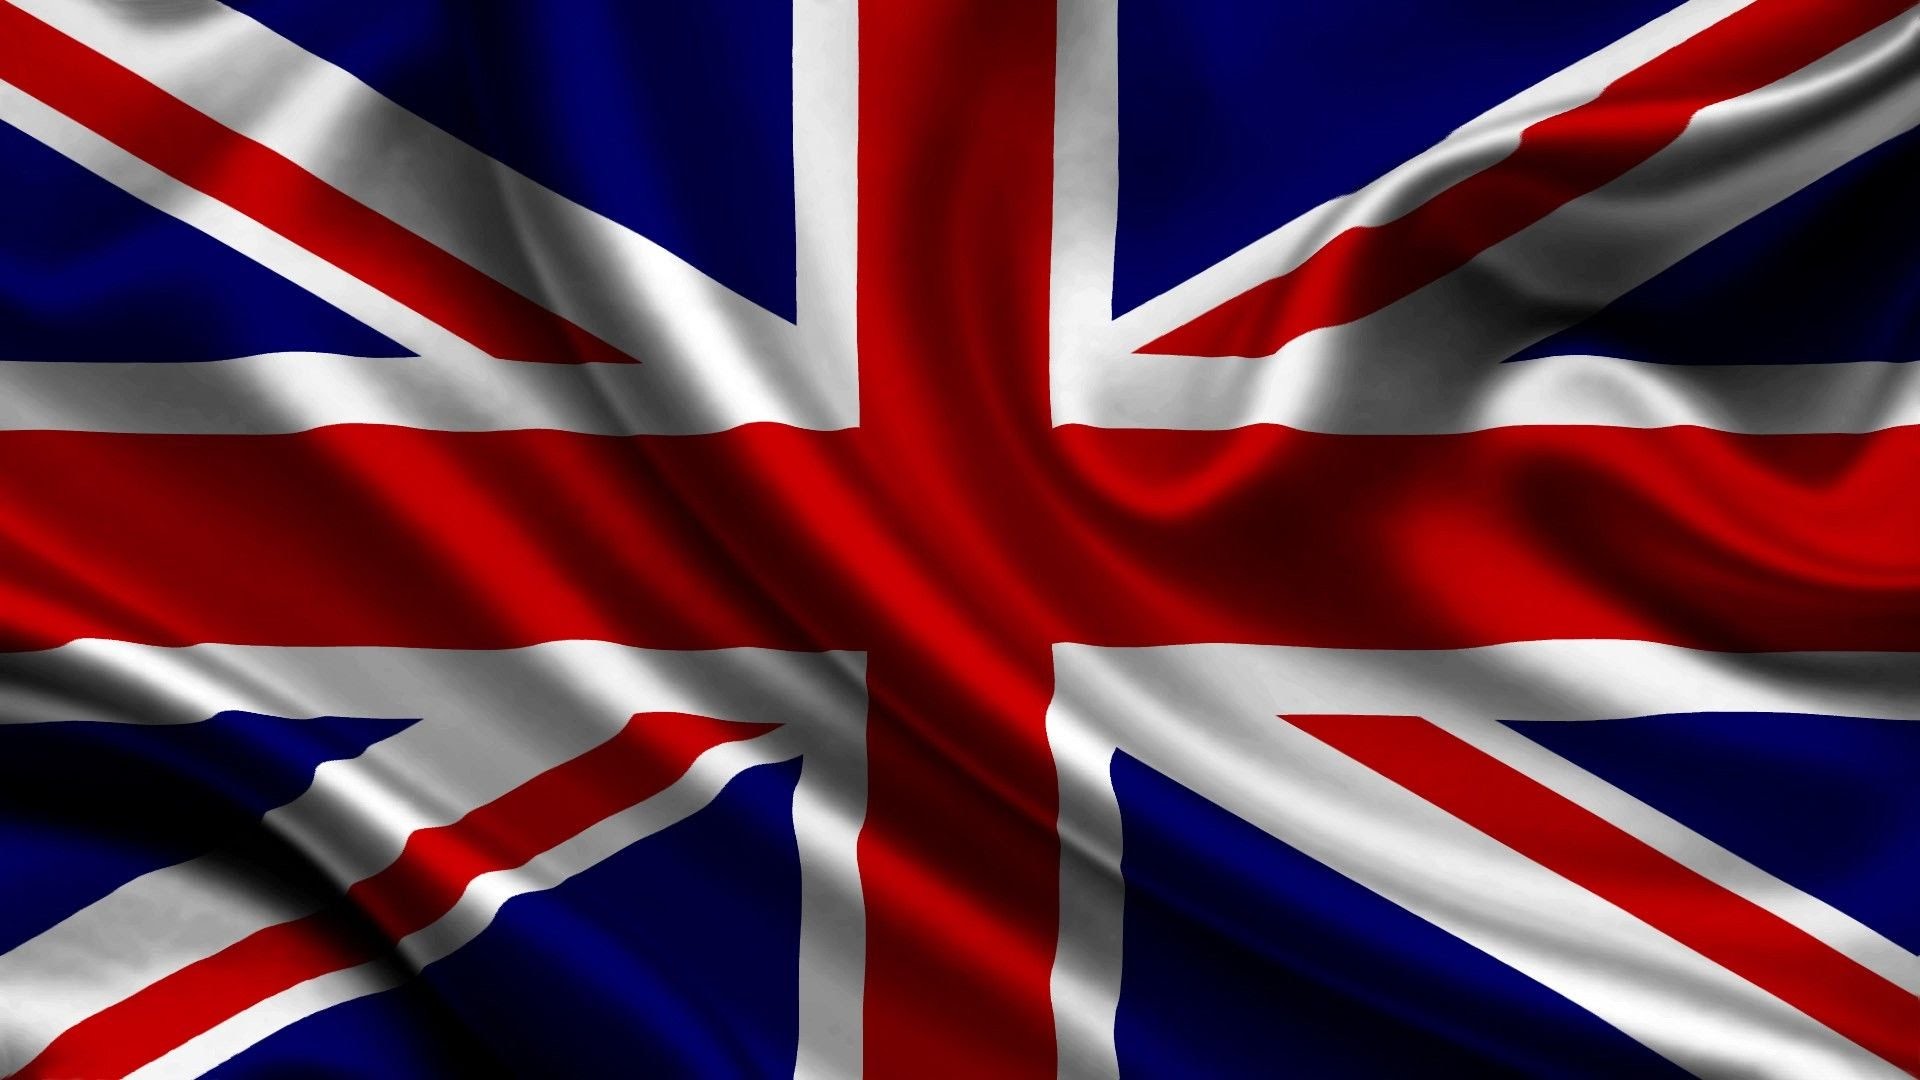 1920x1080 England-Bans-Its-Own-Flag-to-Avoid-Offending-